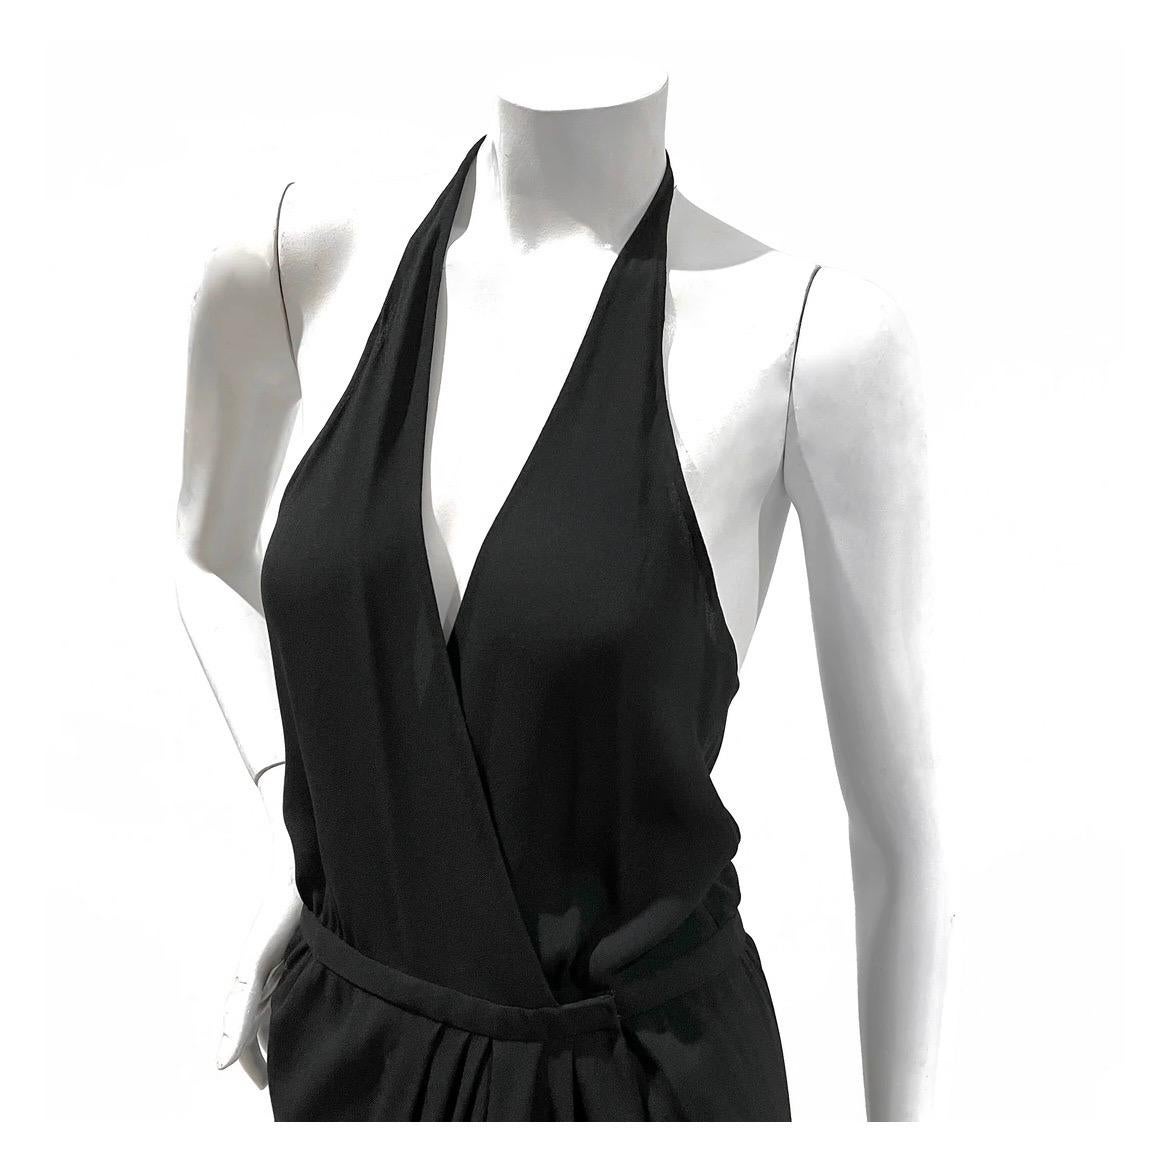 Halter wrap dress by Halston
1970's
Black crepe jersey
Wrapping surplice bodice
Seamless halter 
Double hidden hook closure at waist 
Asymmetrical drape from waist 
Condition: Excellent vintage condition, no visible wear  
Size/Measurements:  

Size